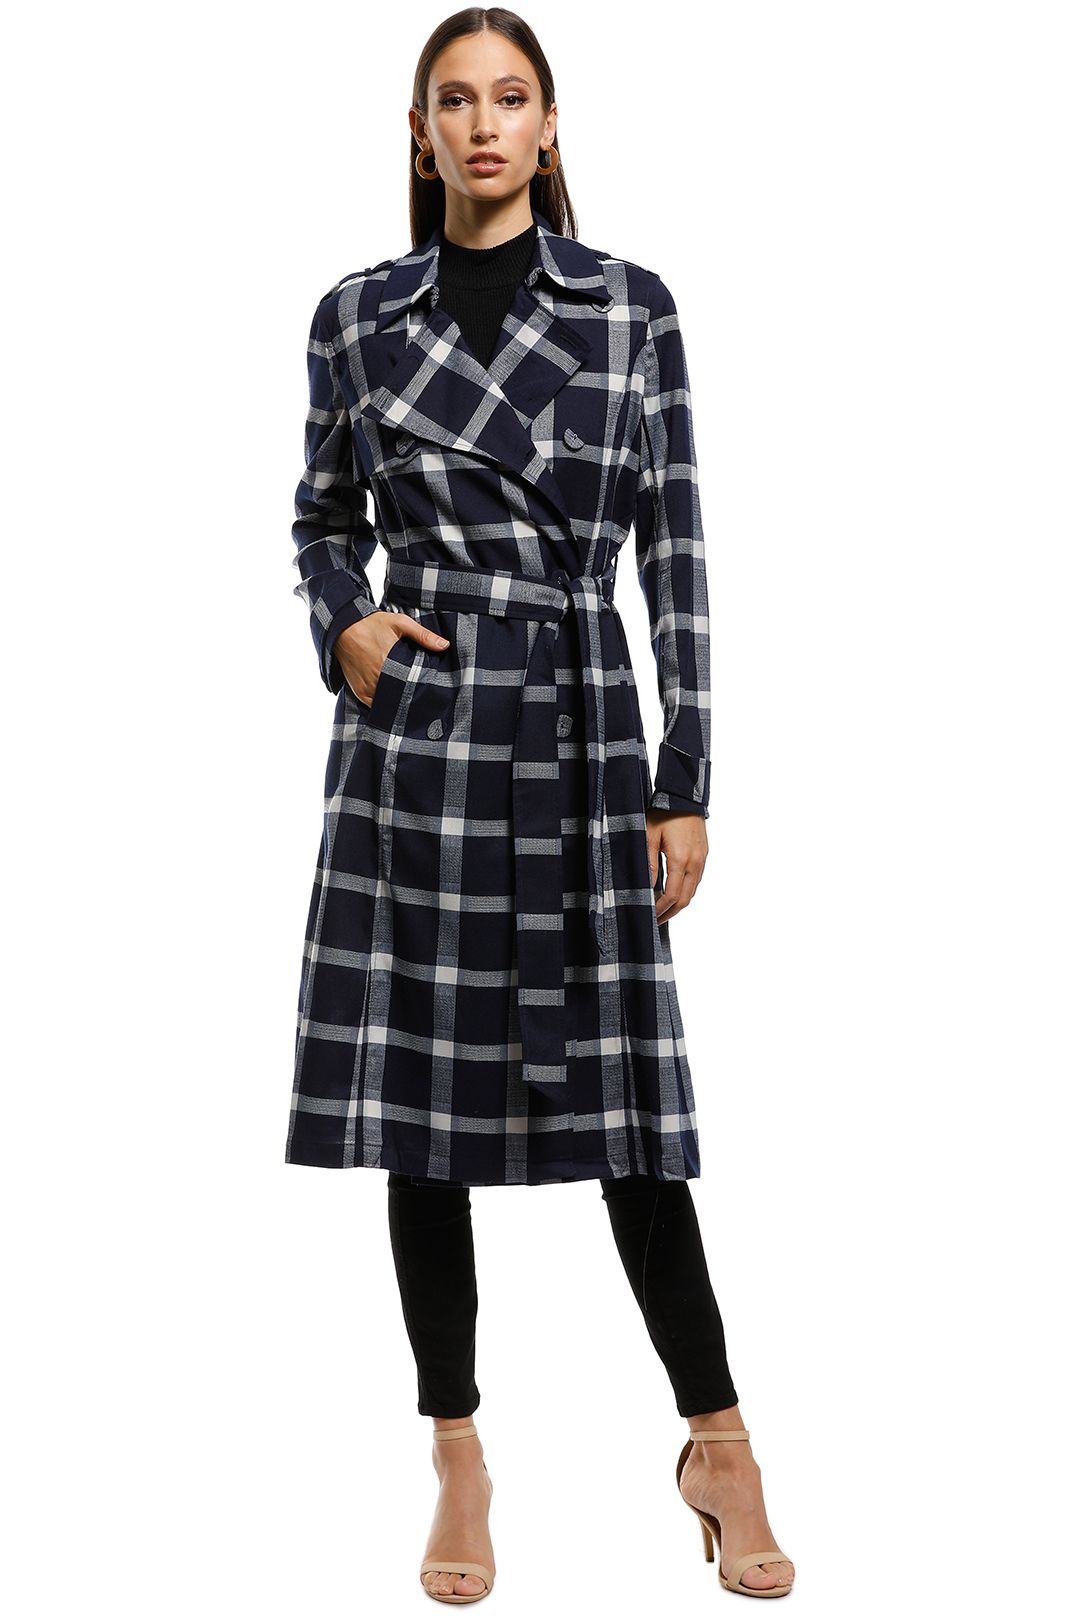 Indiana Trench Coat by Saints the Label for Hire | GlamCorner